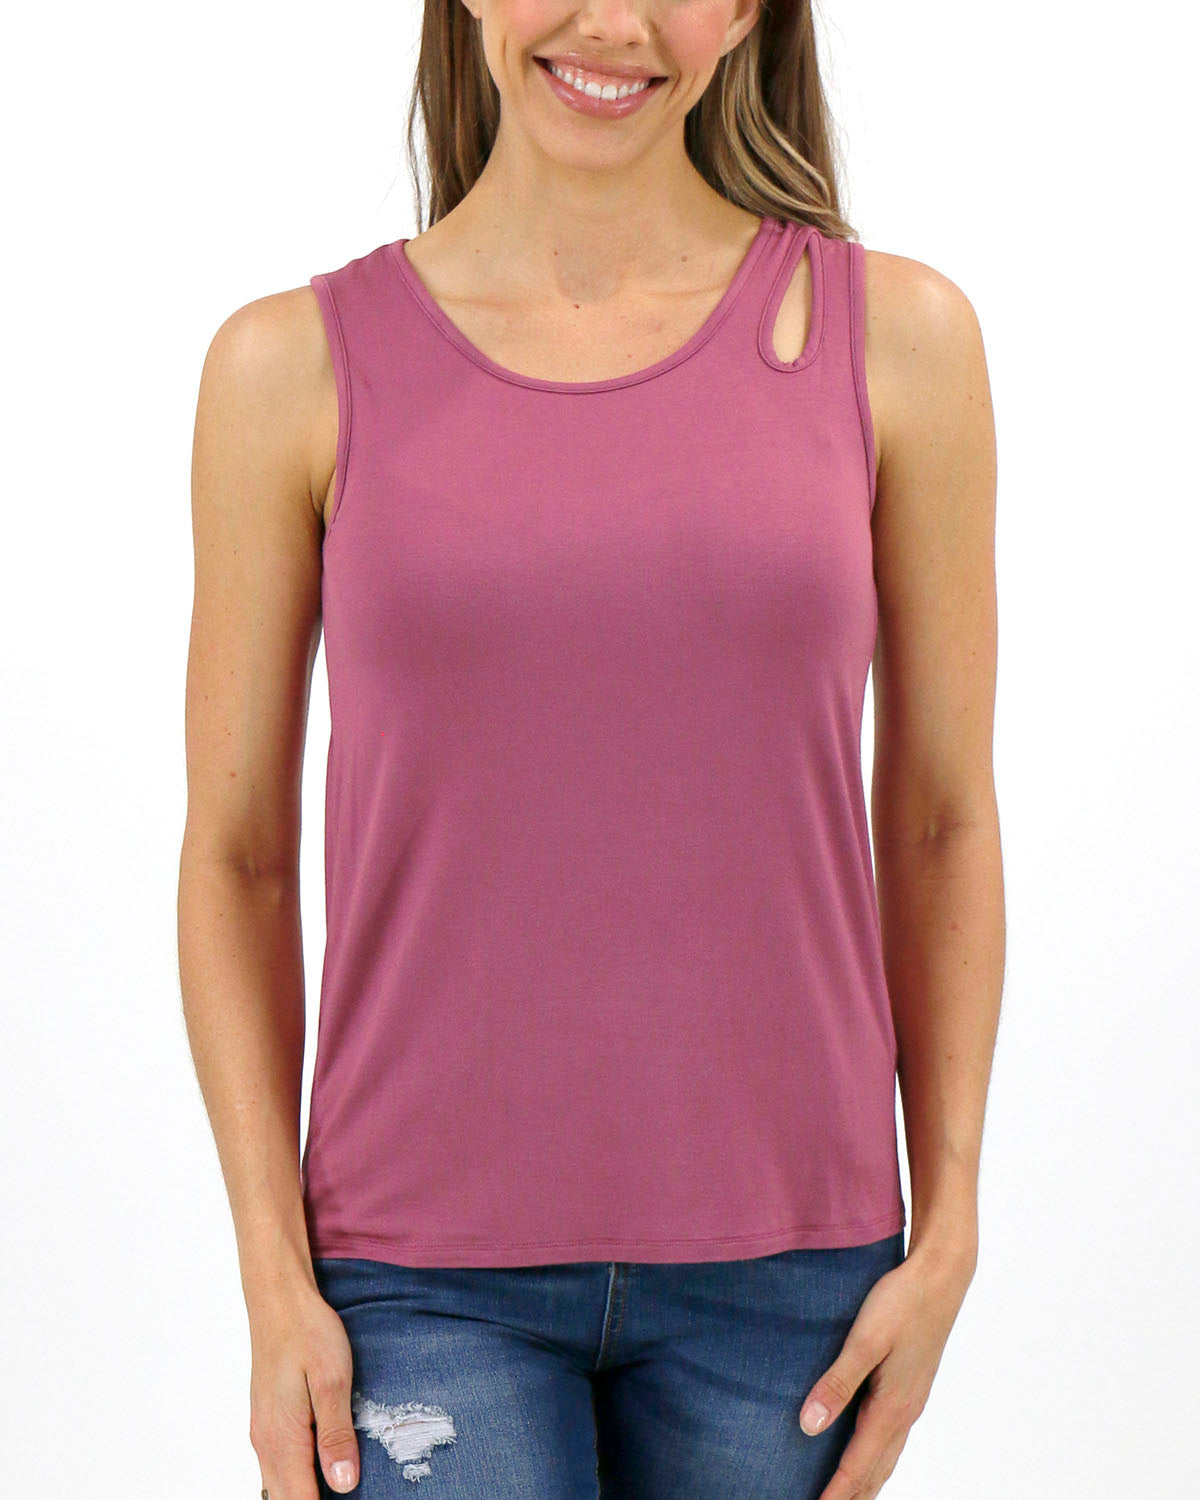 Cut-Out Perfect Scoop Neck Tank in Petal - FINAL SALE - Grace and Lace